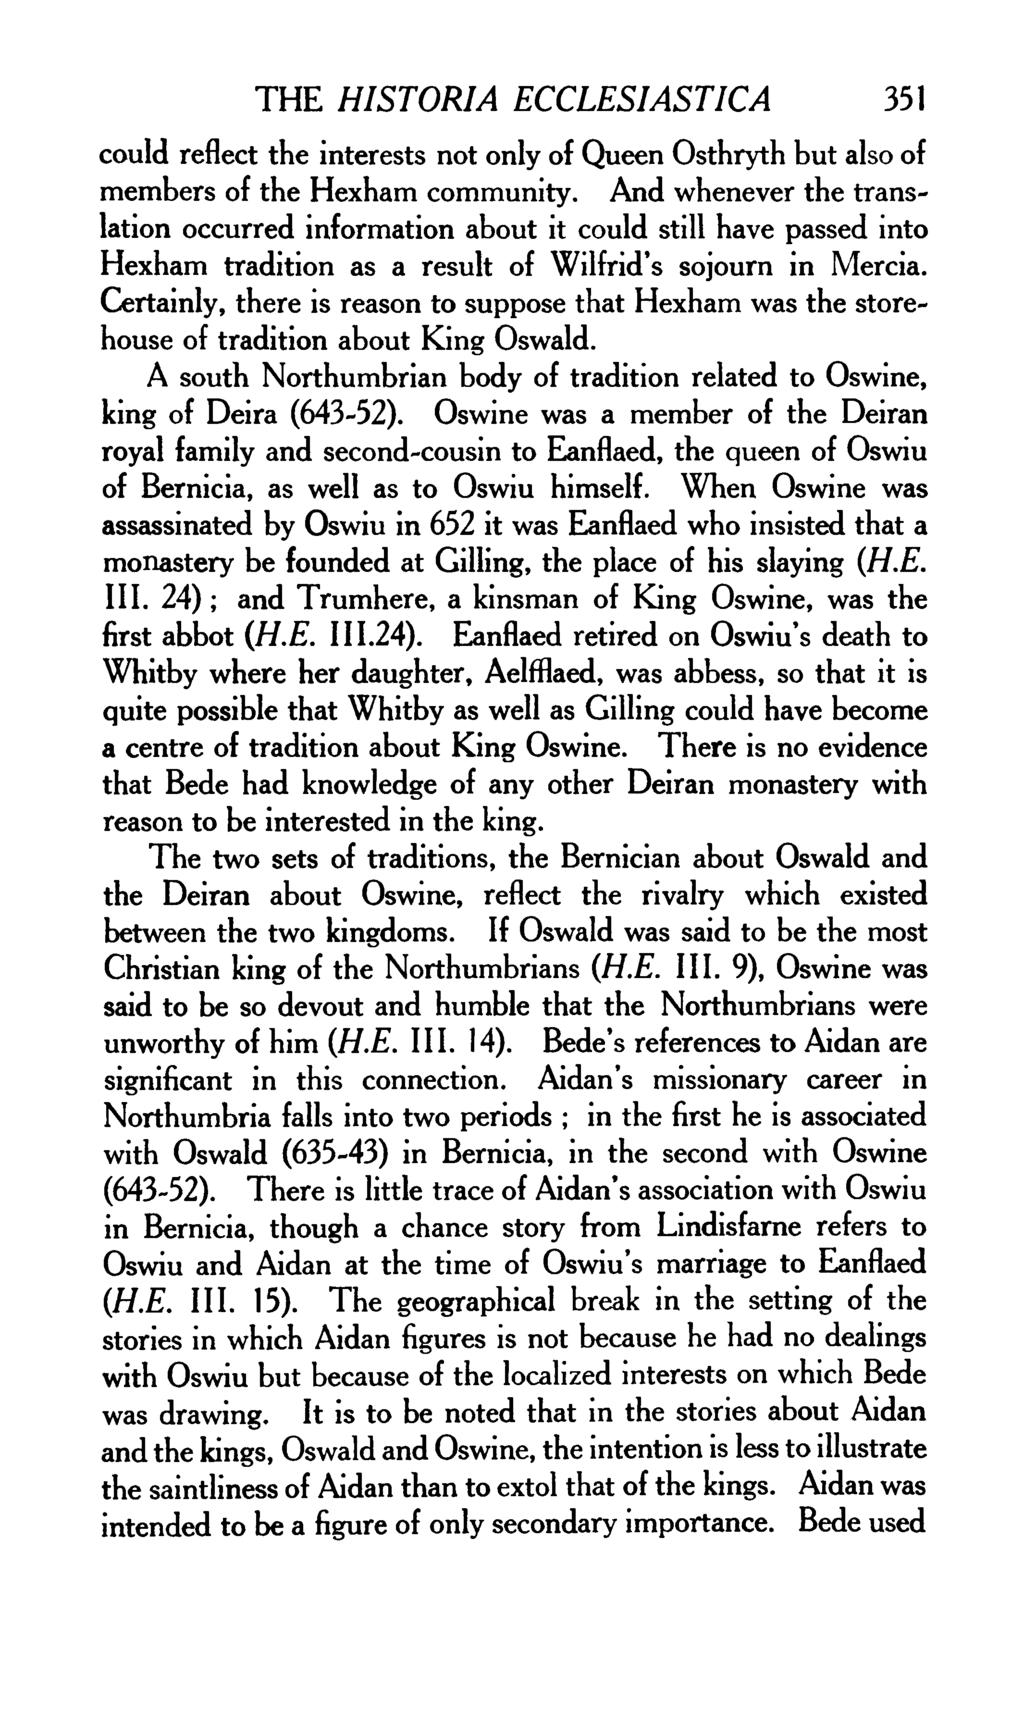 THE HISTORIA ECCLESIASTICA 351 could reflect the interests not only of Queen Osthryth but also of members of the Hexham community.